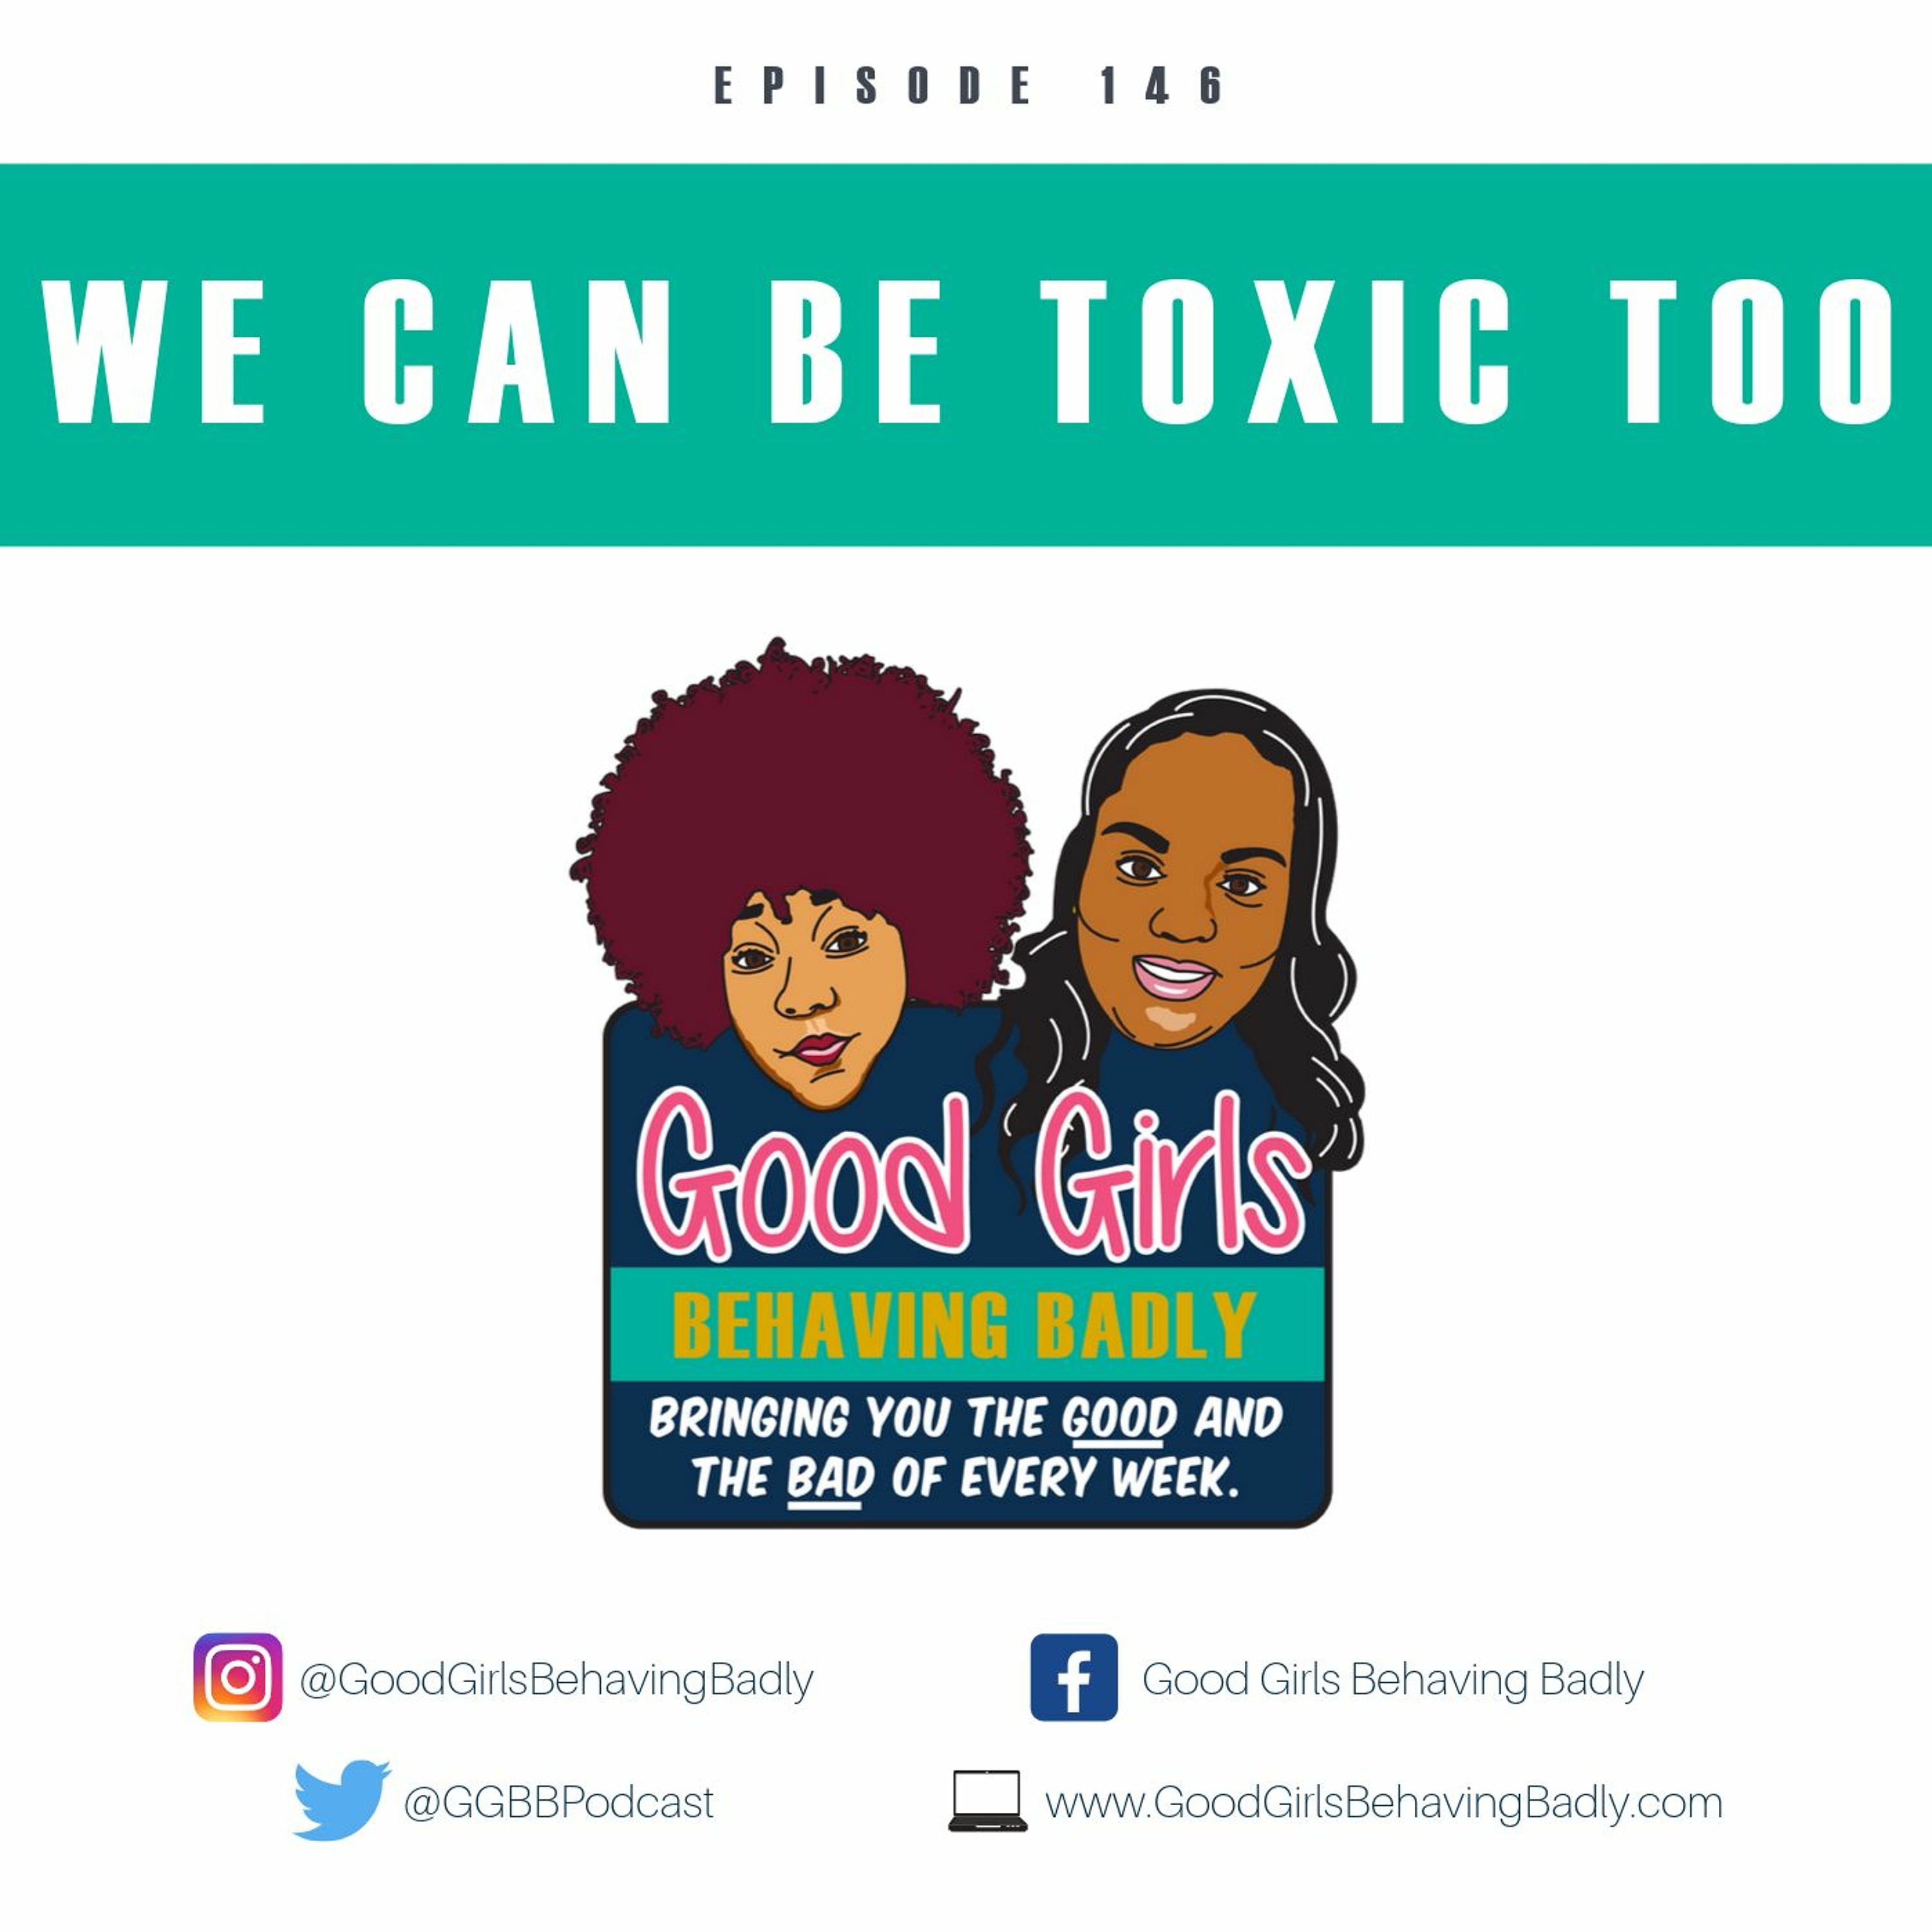 Episode 146: We Can Be Toxic Too